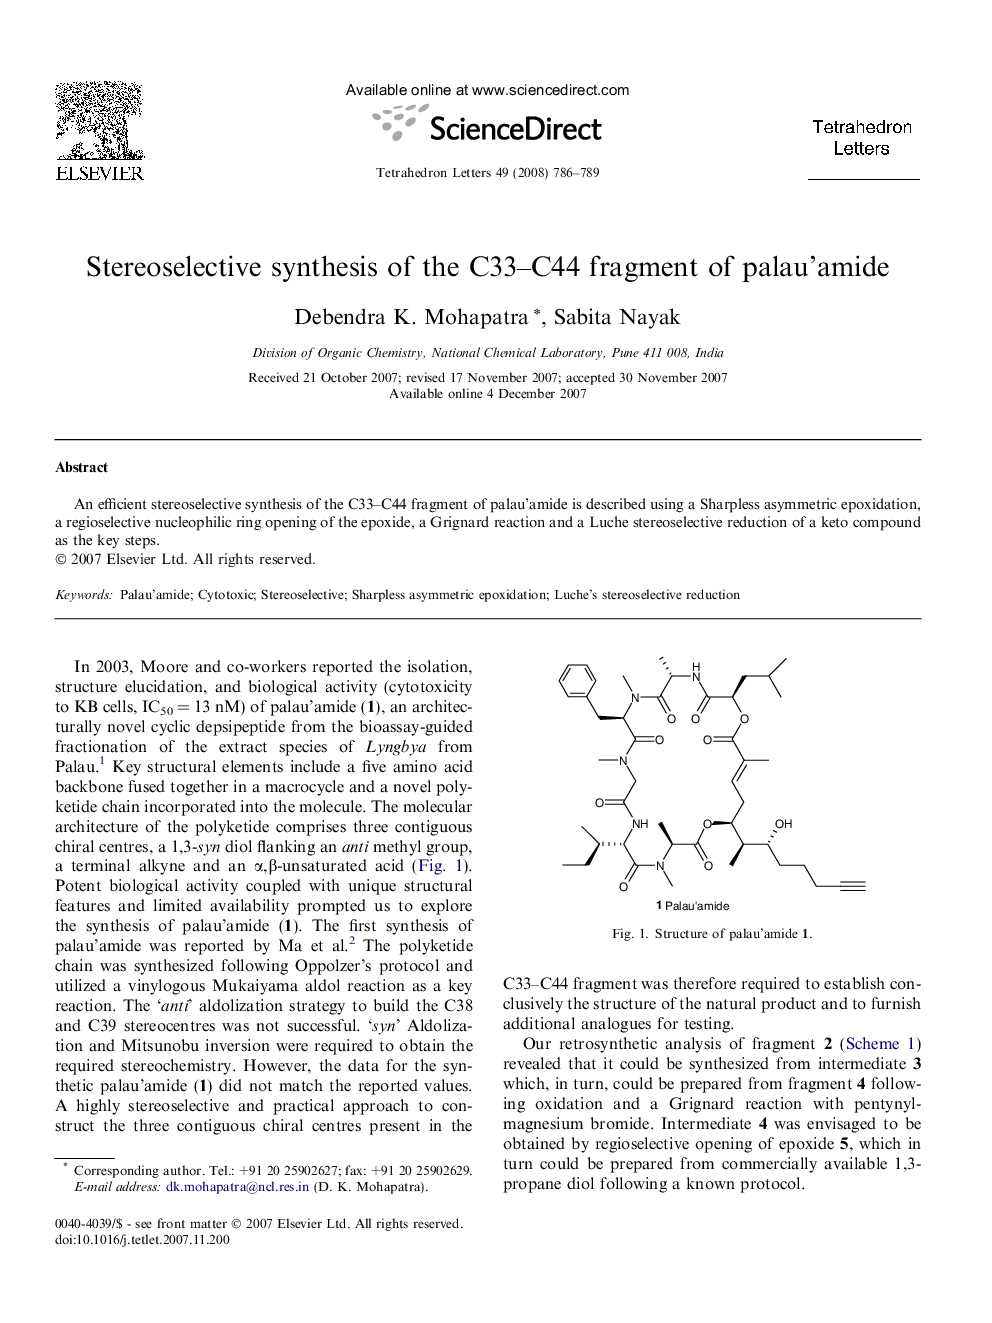 Stereoselective synthesis of the C33-C44 fragment of palau'amide